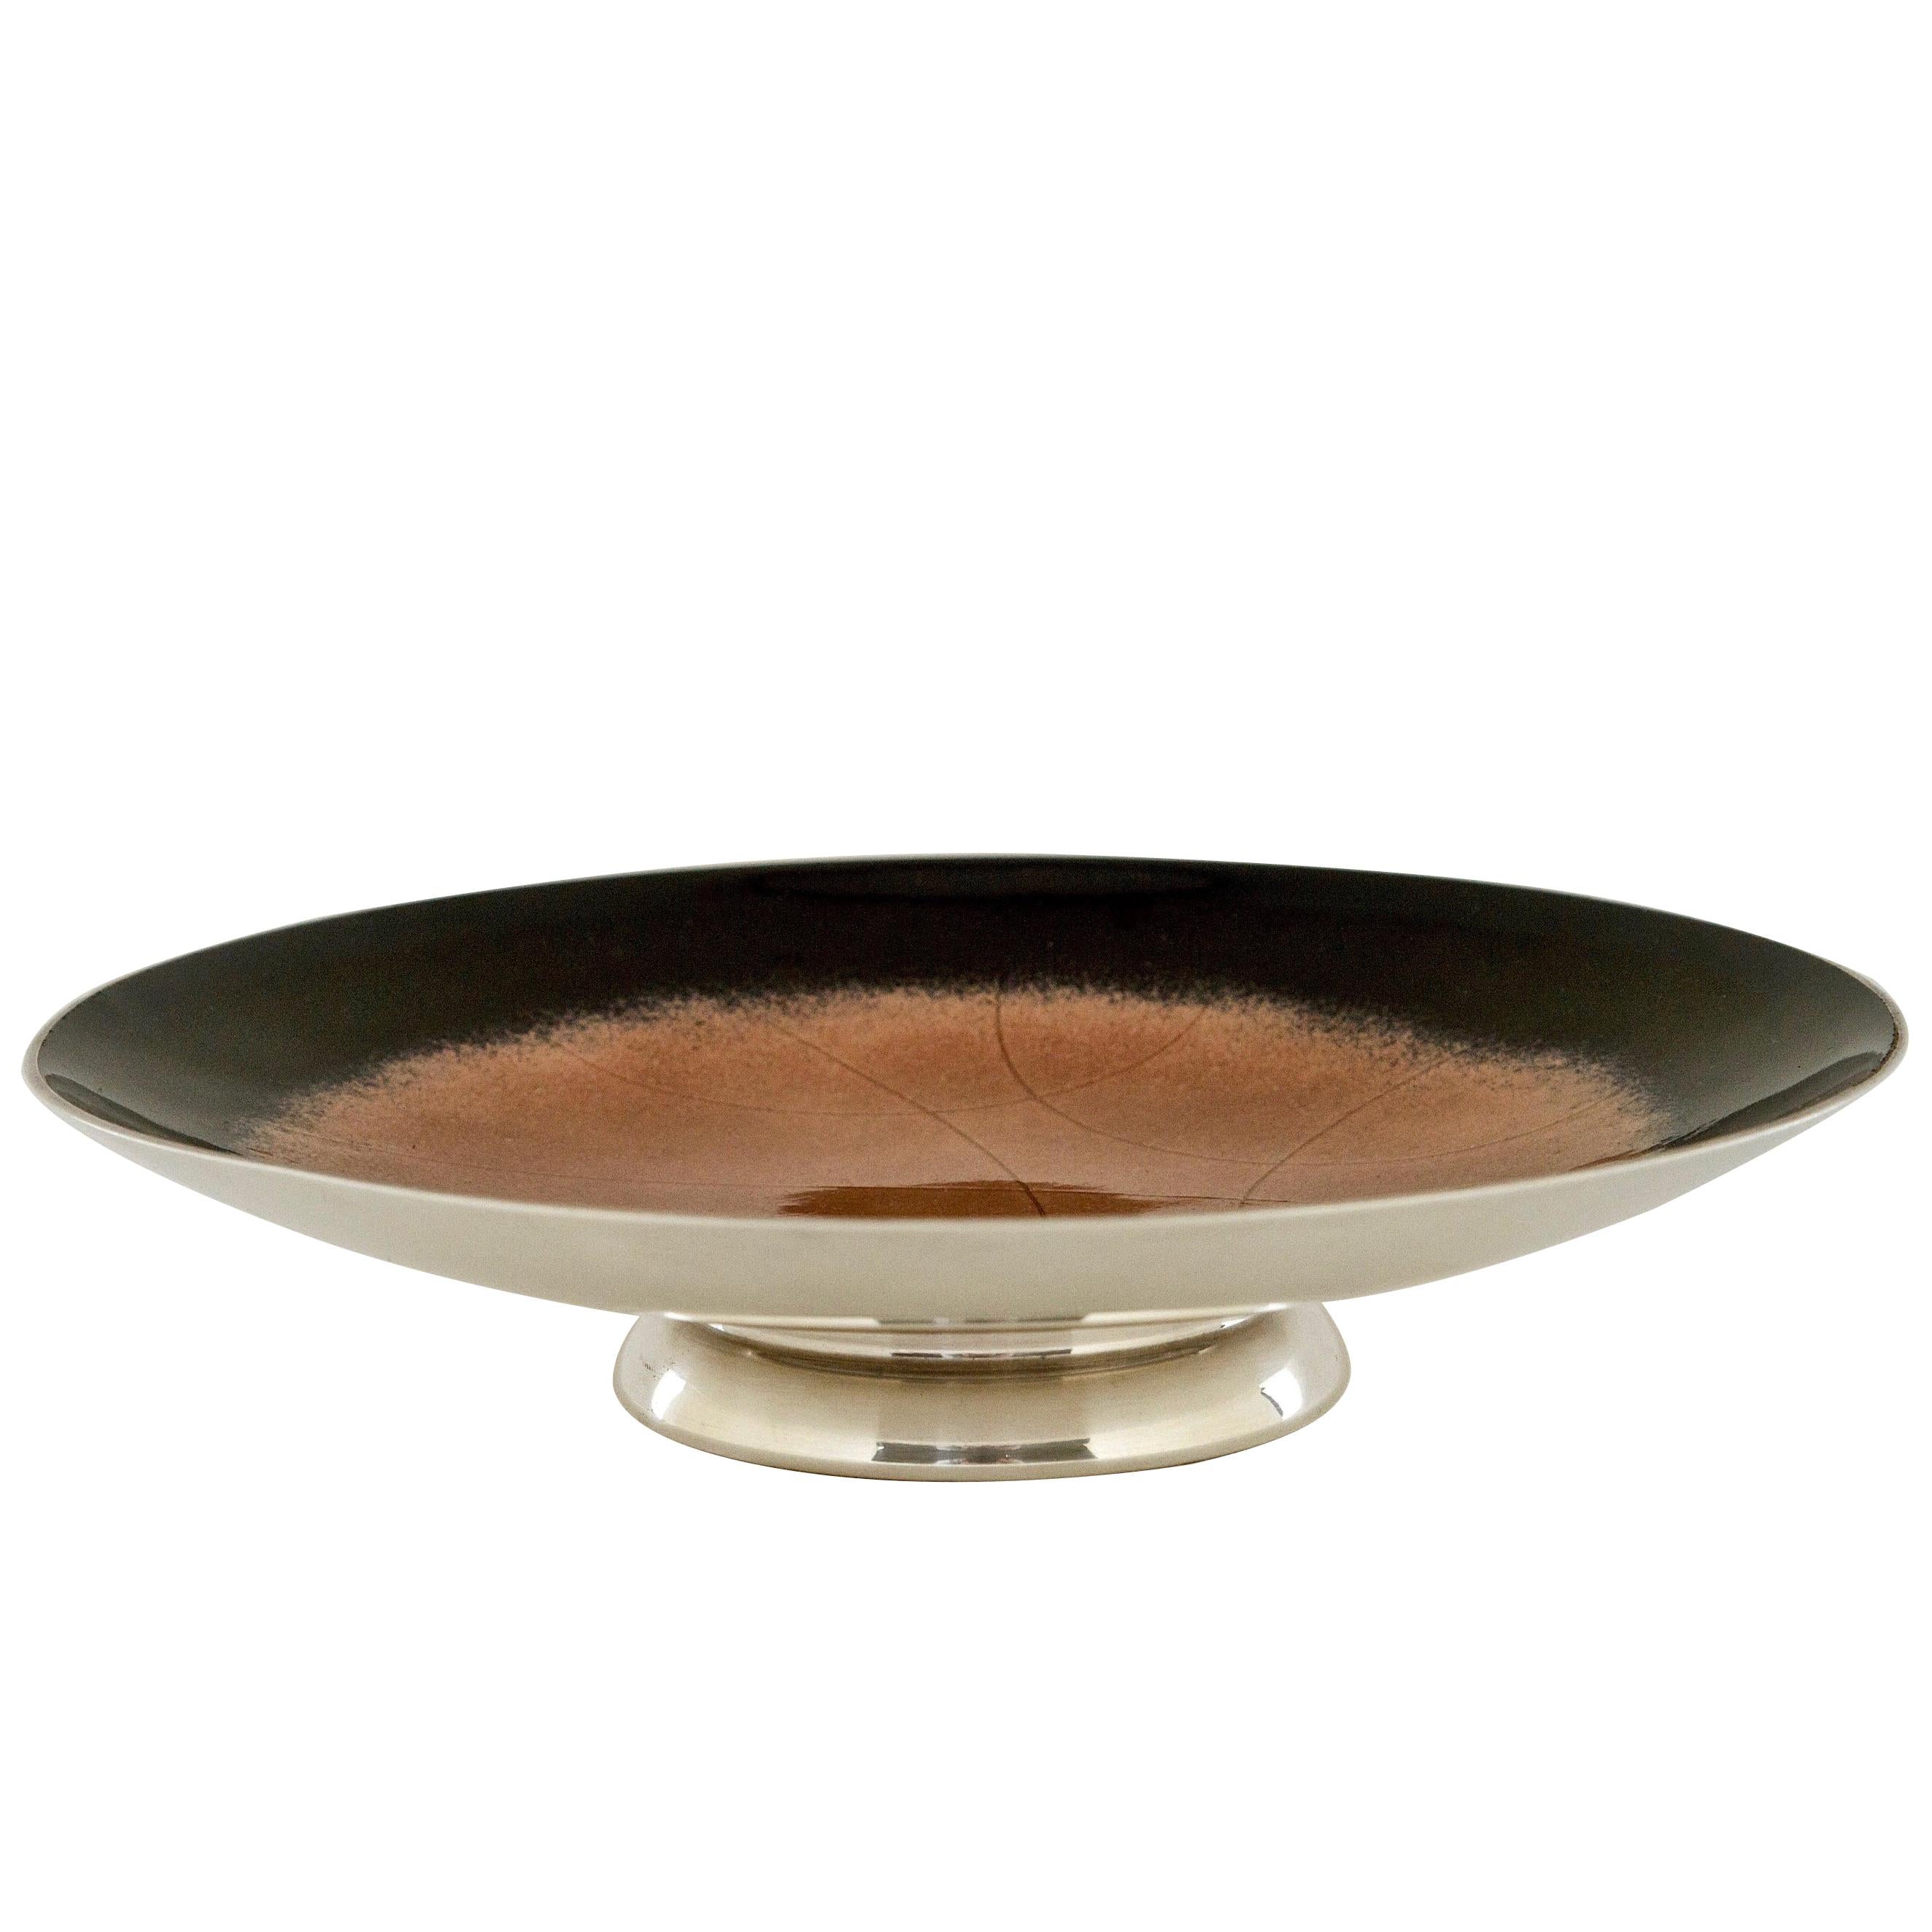 A stylish Mid-Century Modern enameled tazza (a shallow footed dish) from Towle Silversmiths of Newburyport, Massachusetts, circa 1955. This vintage piece is Illustrated on page 273 of Jewel Stern's publication, Modernism in American silver 20th